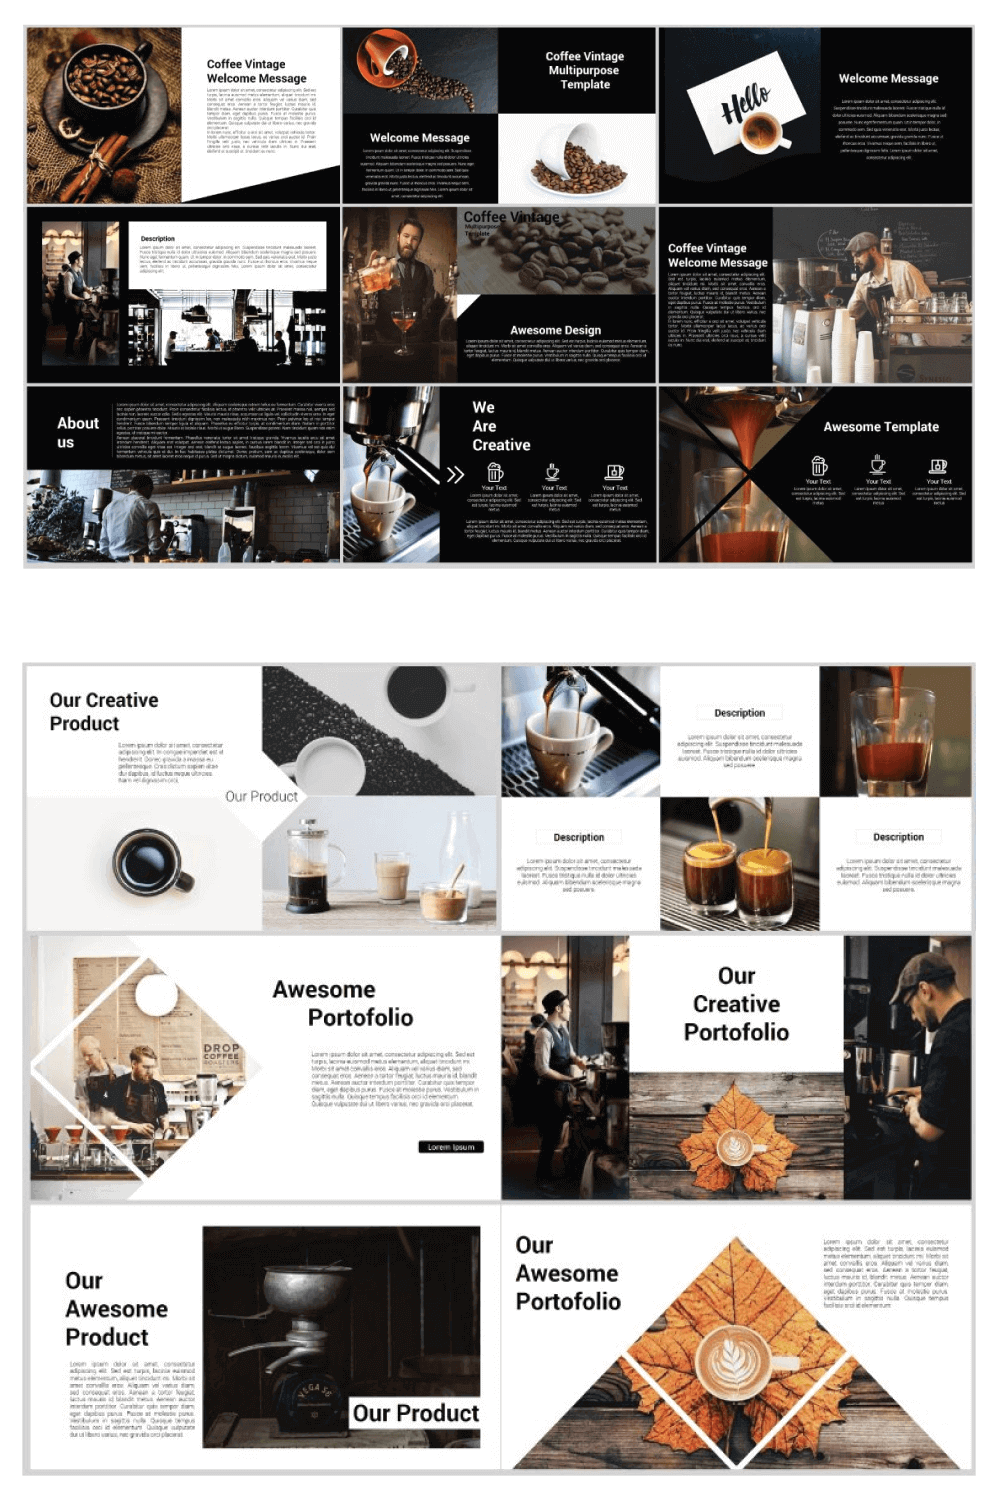 Awesome Product of Coffee Vintage Presentation Template.